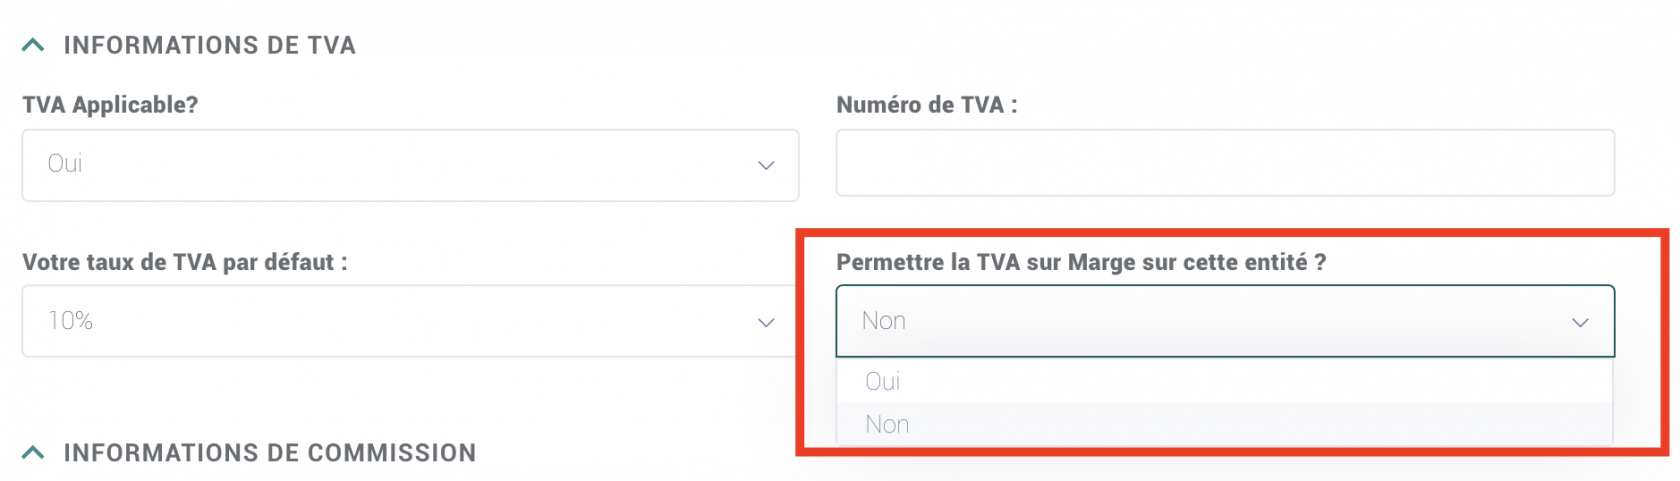 TVA-sur-marge.png